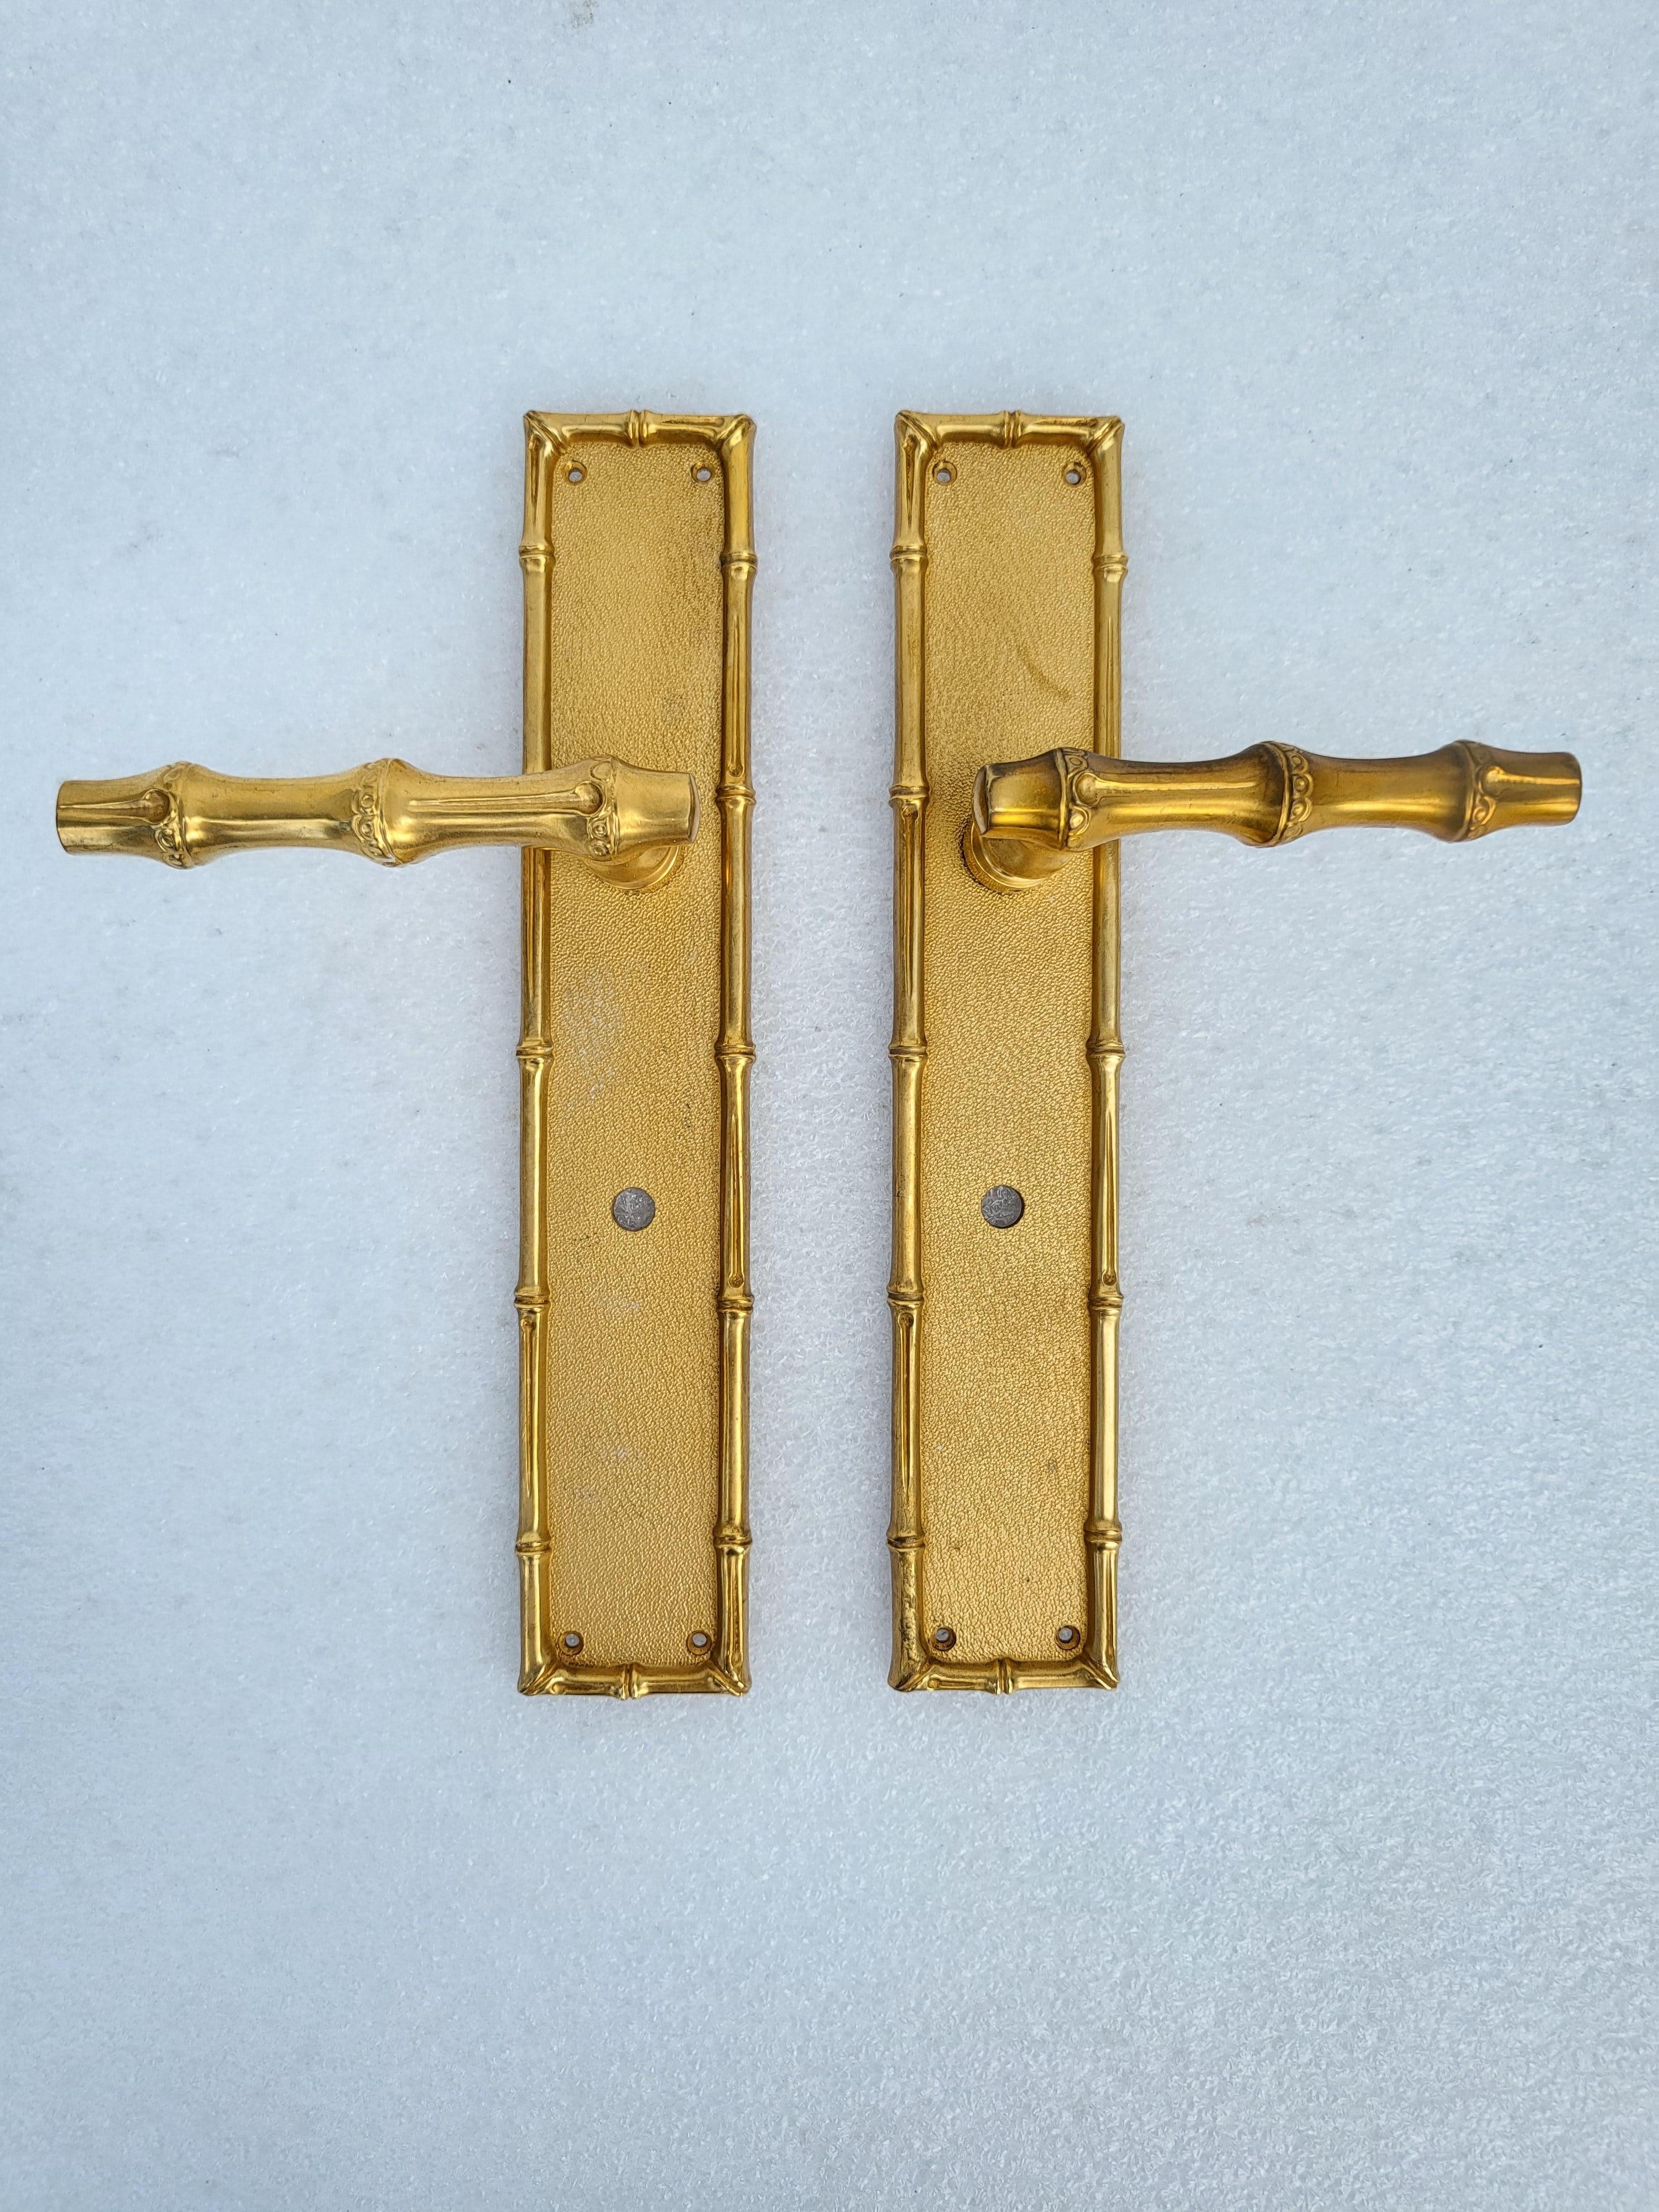 Bronze Maison Baguès Door Handles, 8 Pairs Available, Priced by Pair For Sale